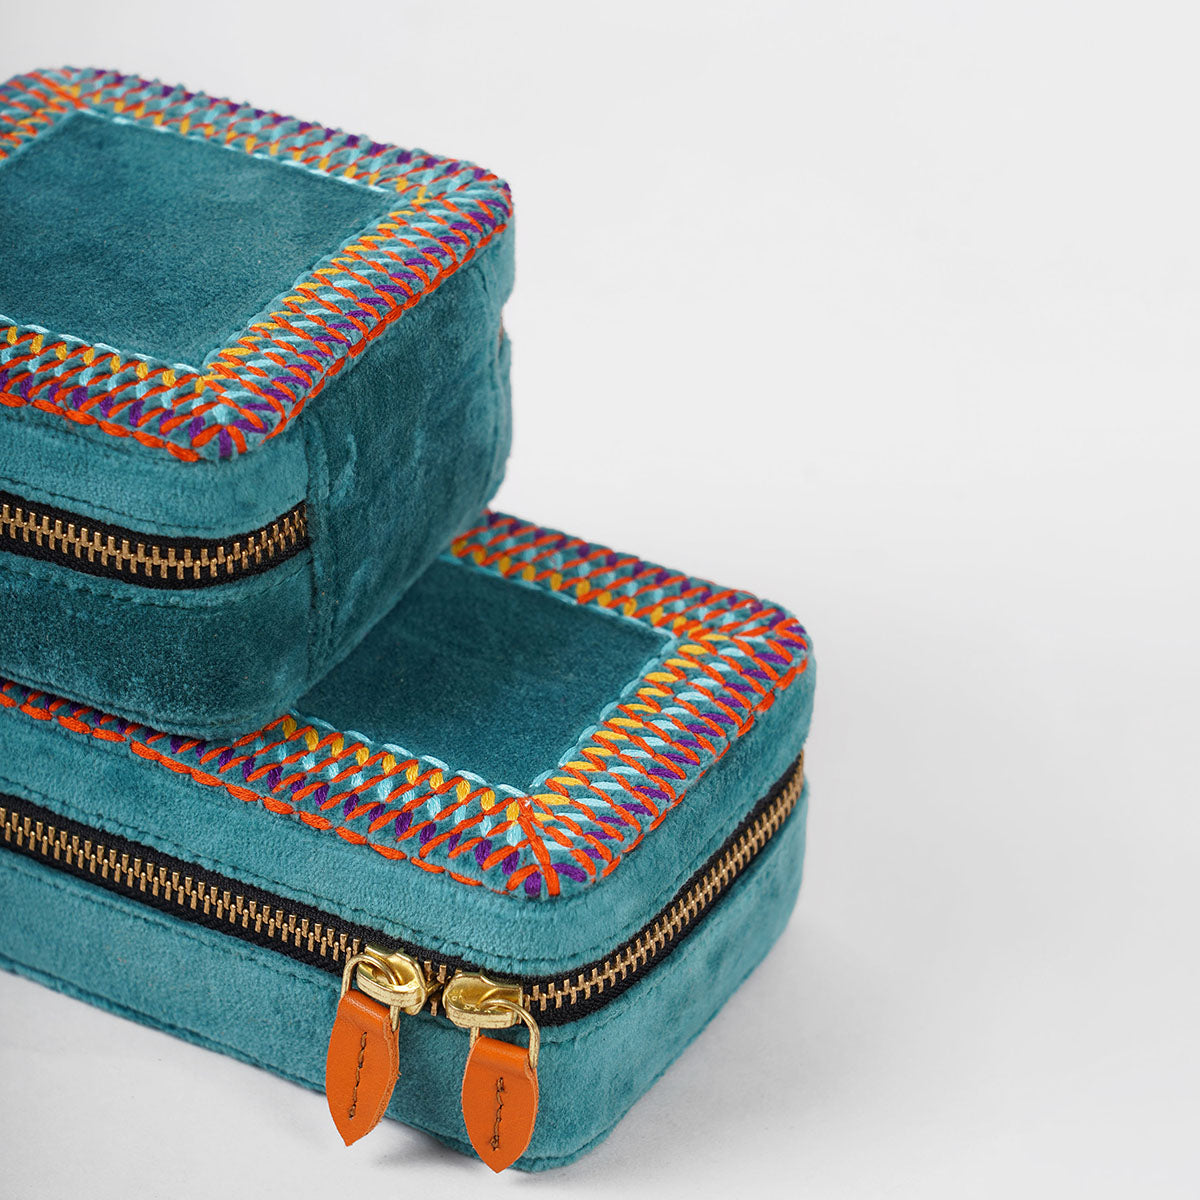 Teal Velvet Square Embroidered Jewellery box